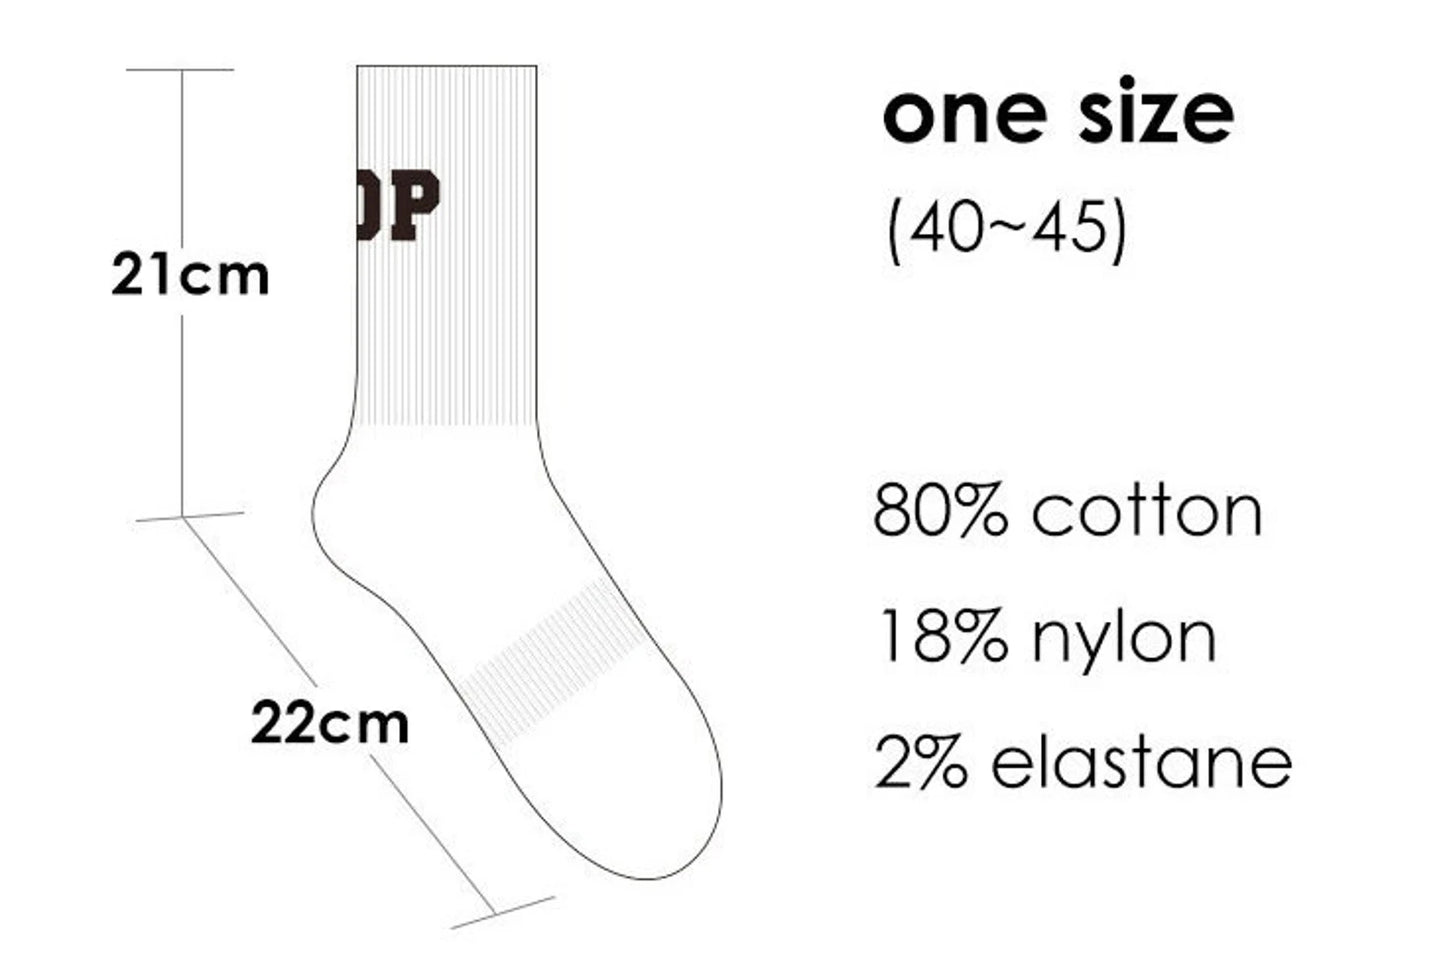 Top Socks - 17.99 with free shipping on Gays+ Store 